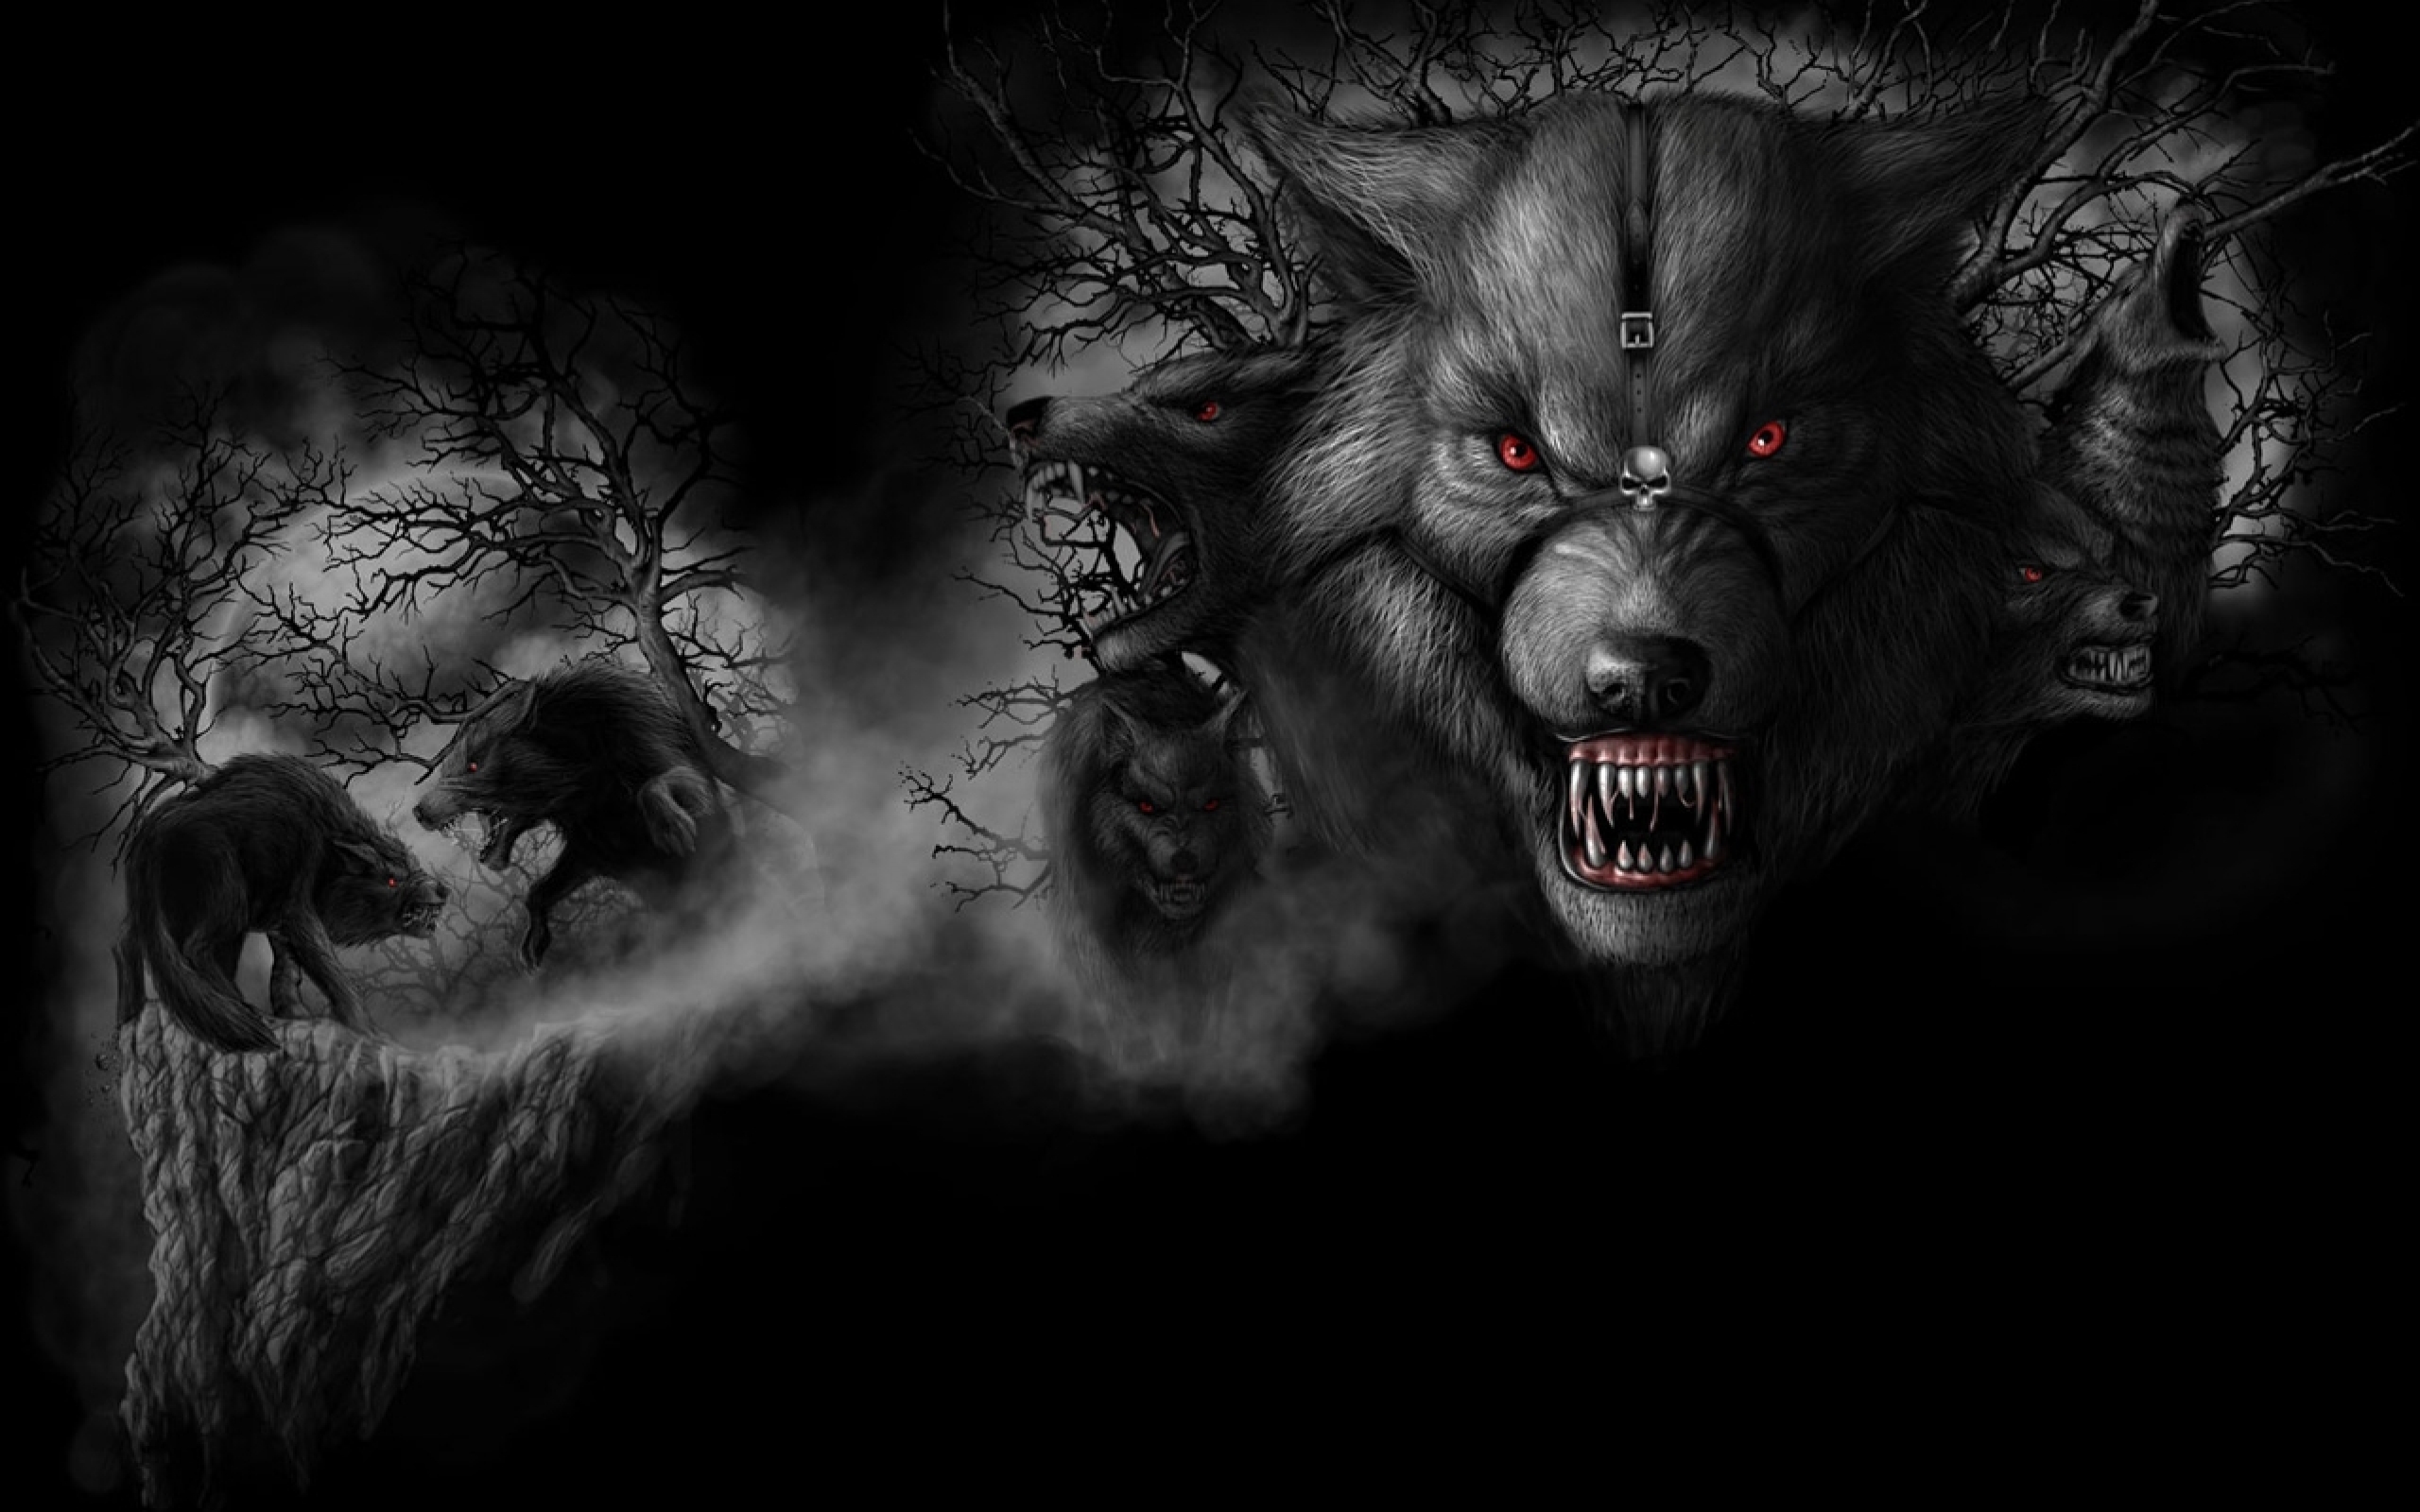 Mobile wallpaper Dark Werewolf 1220918 download the picture for free